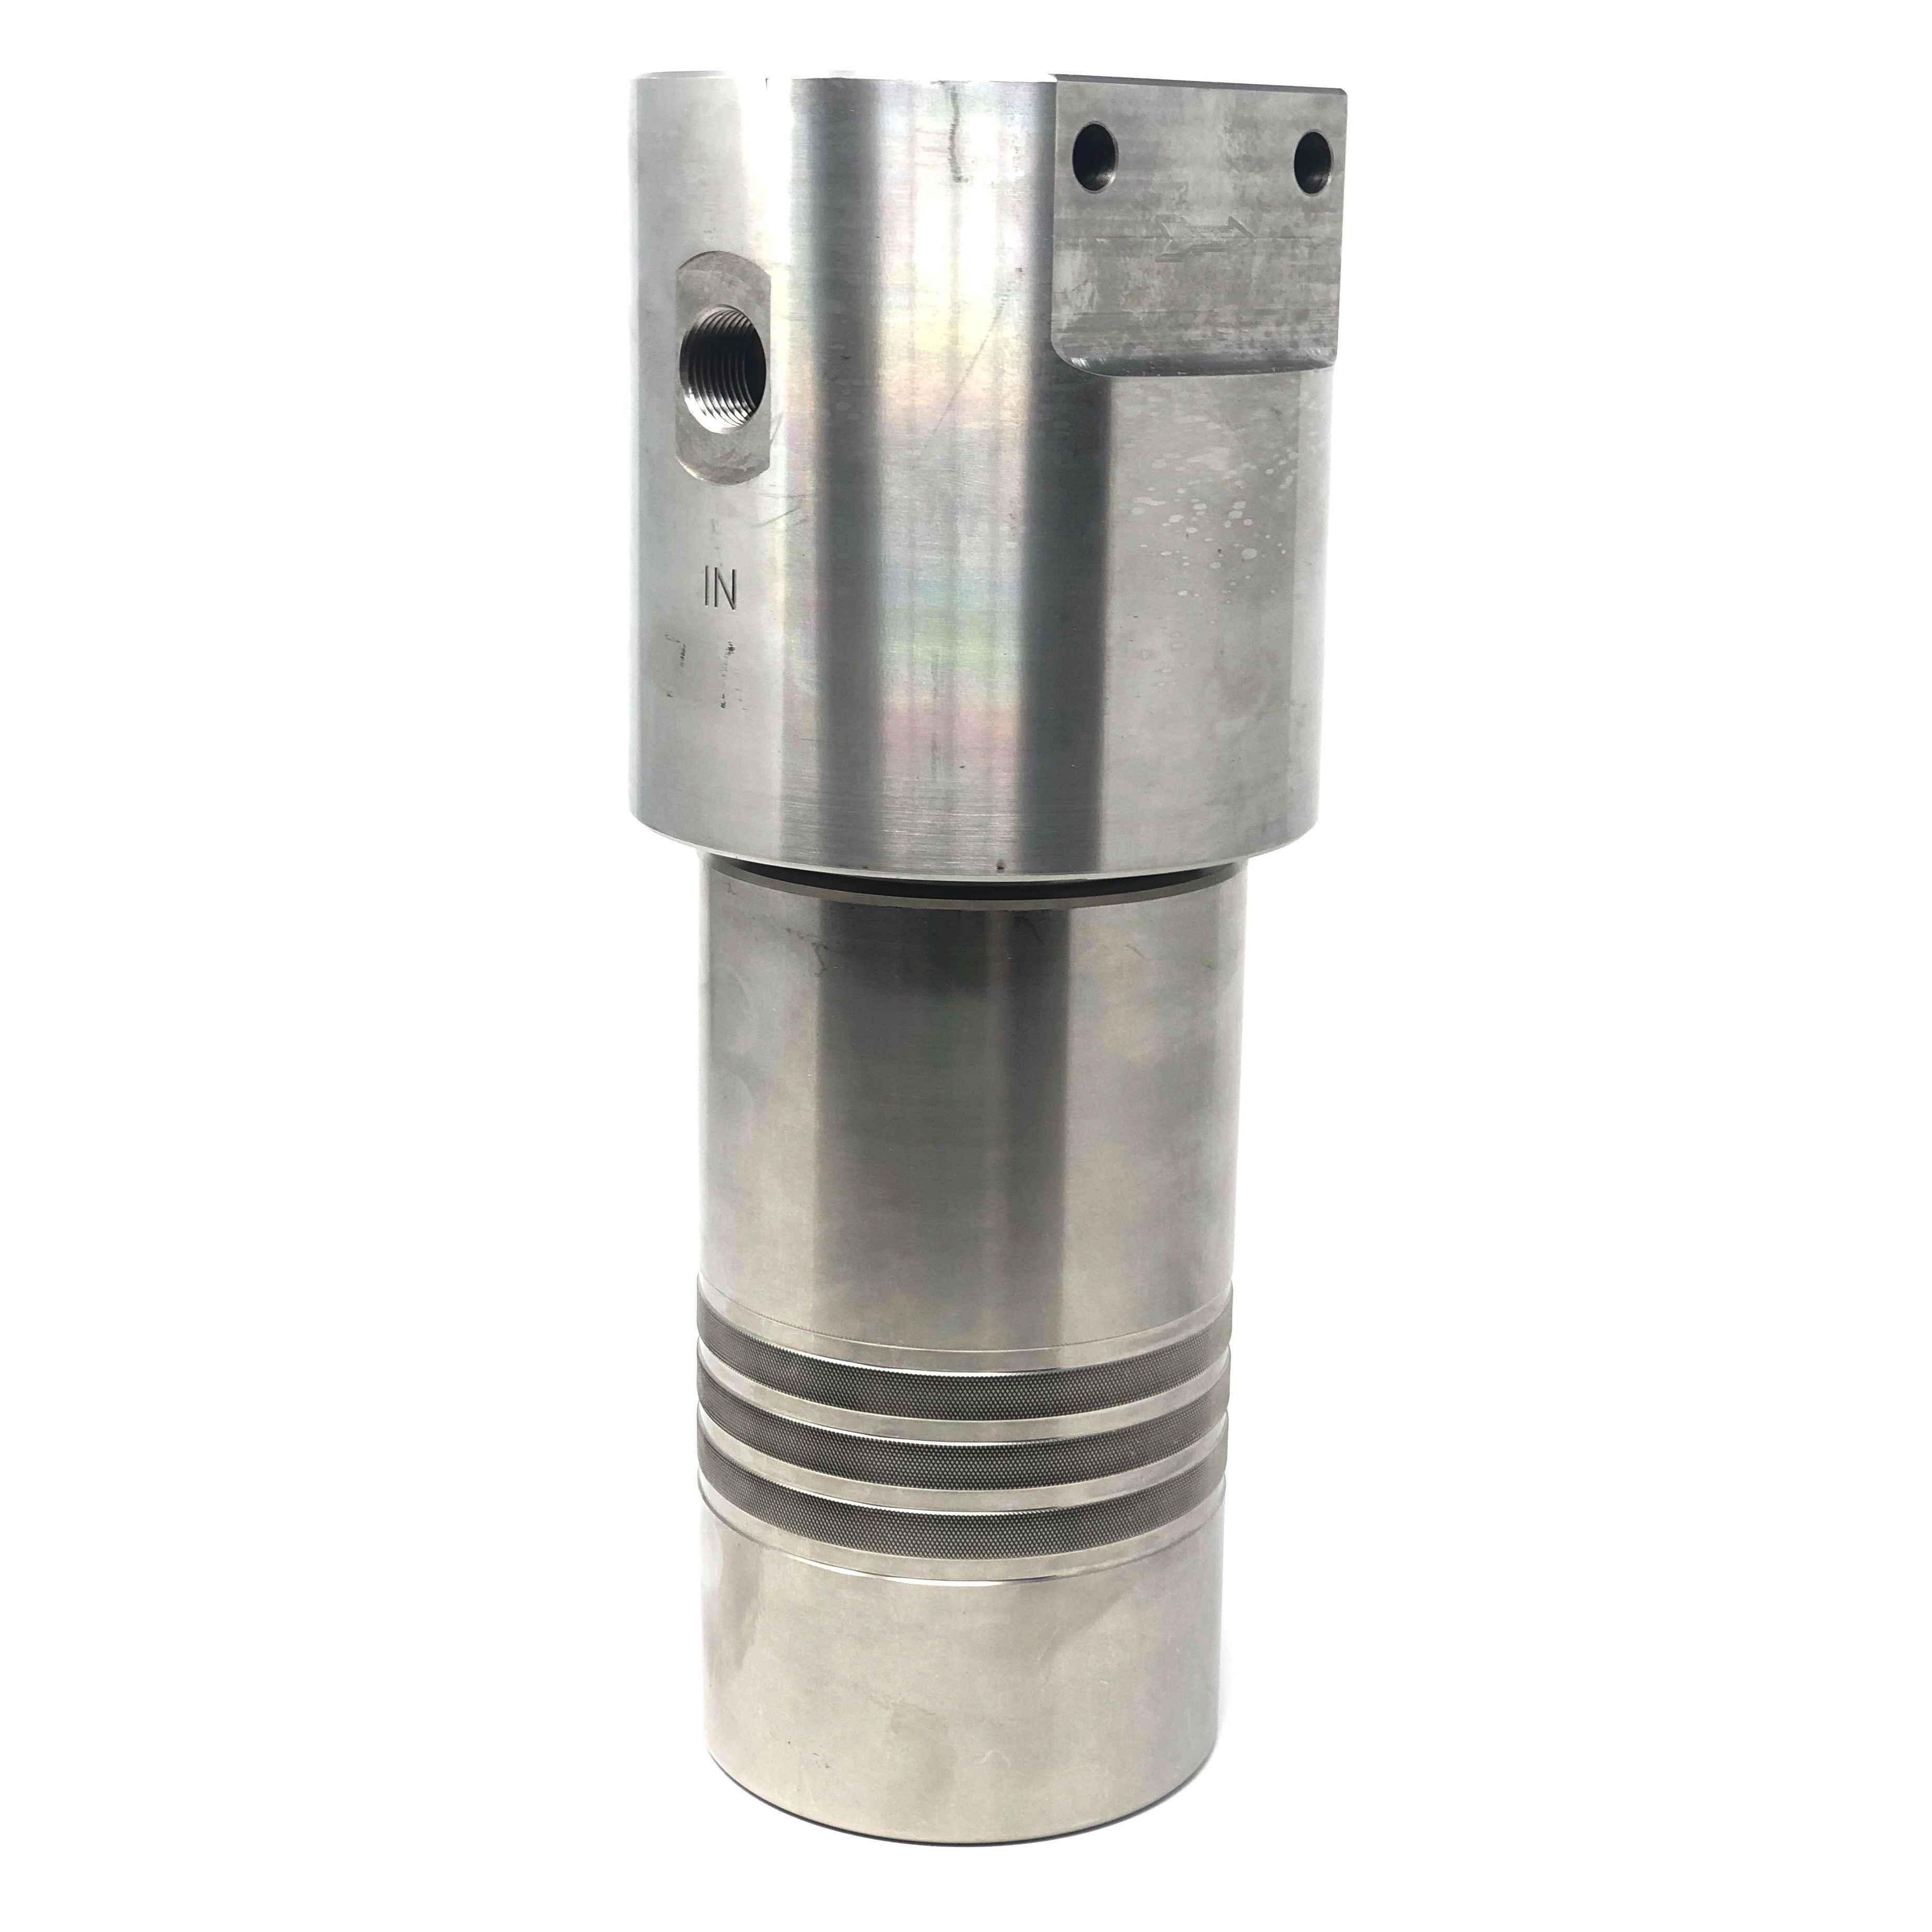 52S-246S-18SEN : Chase Ultra High Pressure Inline Filter, 10000psi, #6 SAE (3/8"), 18 Micron, With Visual Indicator, No Bypass